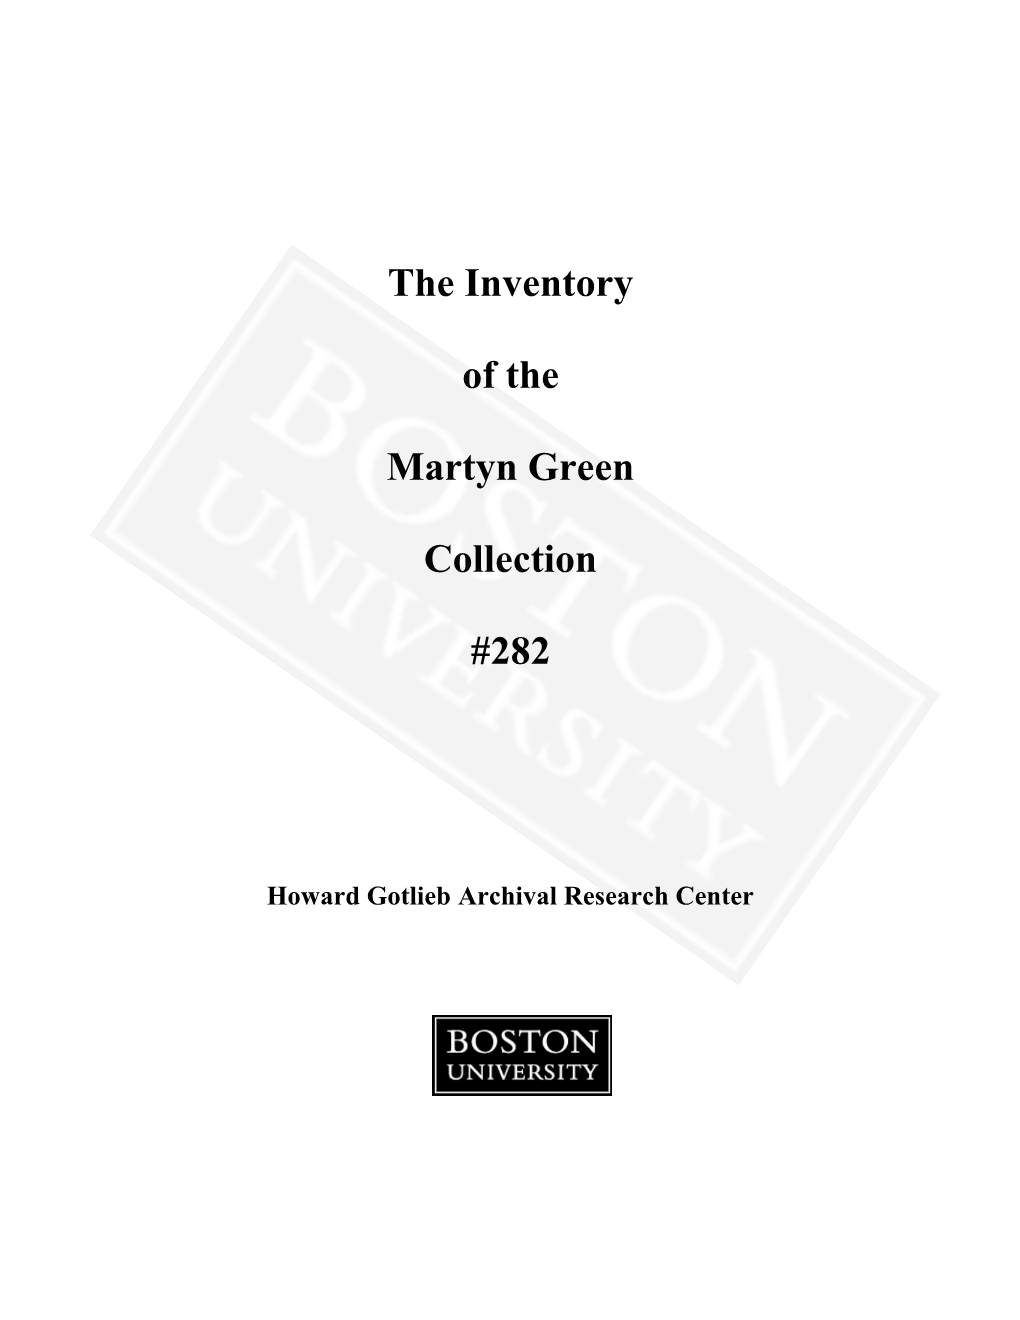 The Inventory of the Martyn Green Collection #282